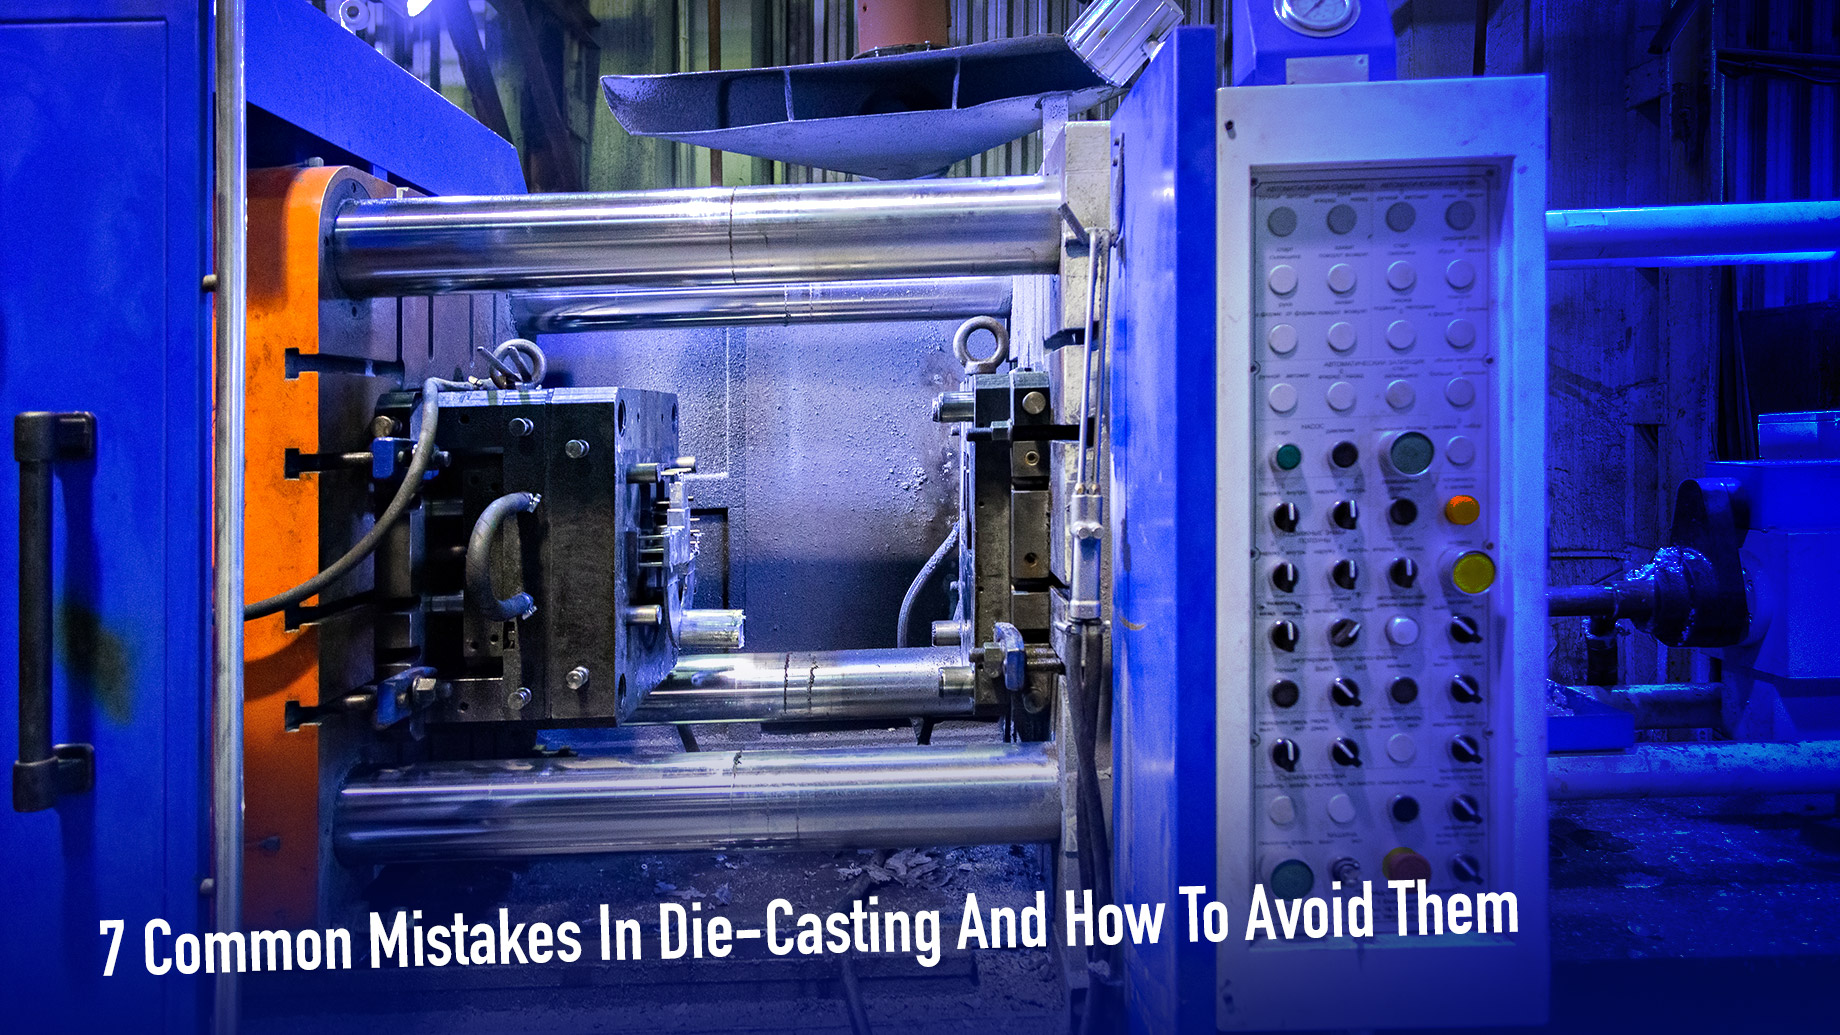 7 Common Mistakes In Die-Casting And How To Avoid Them